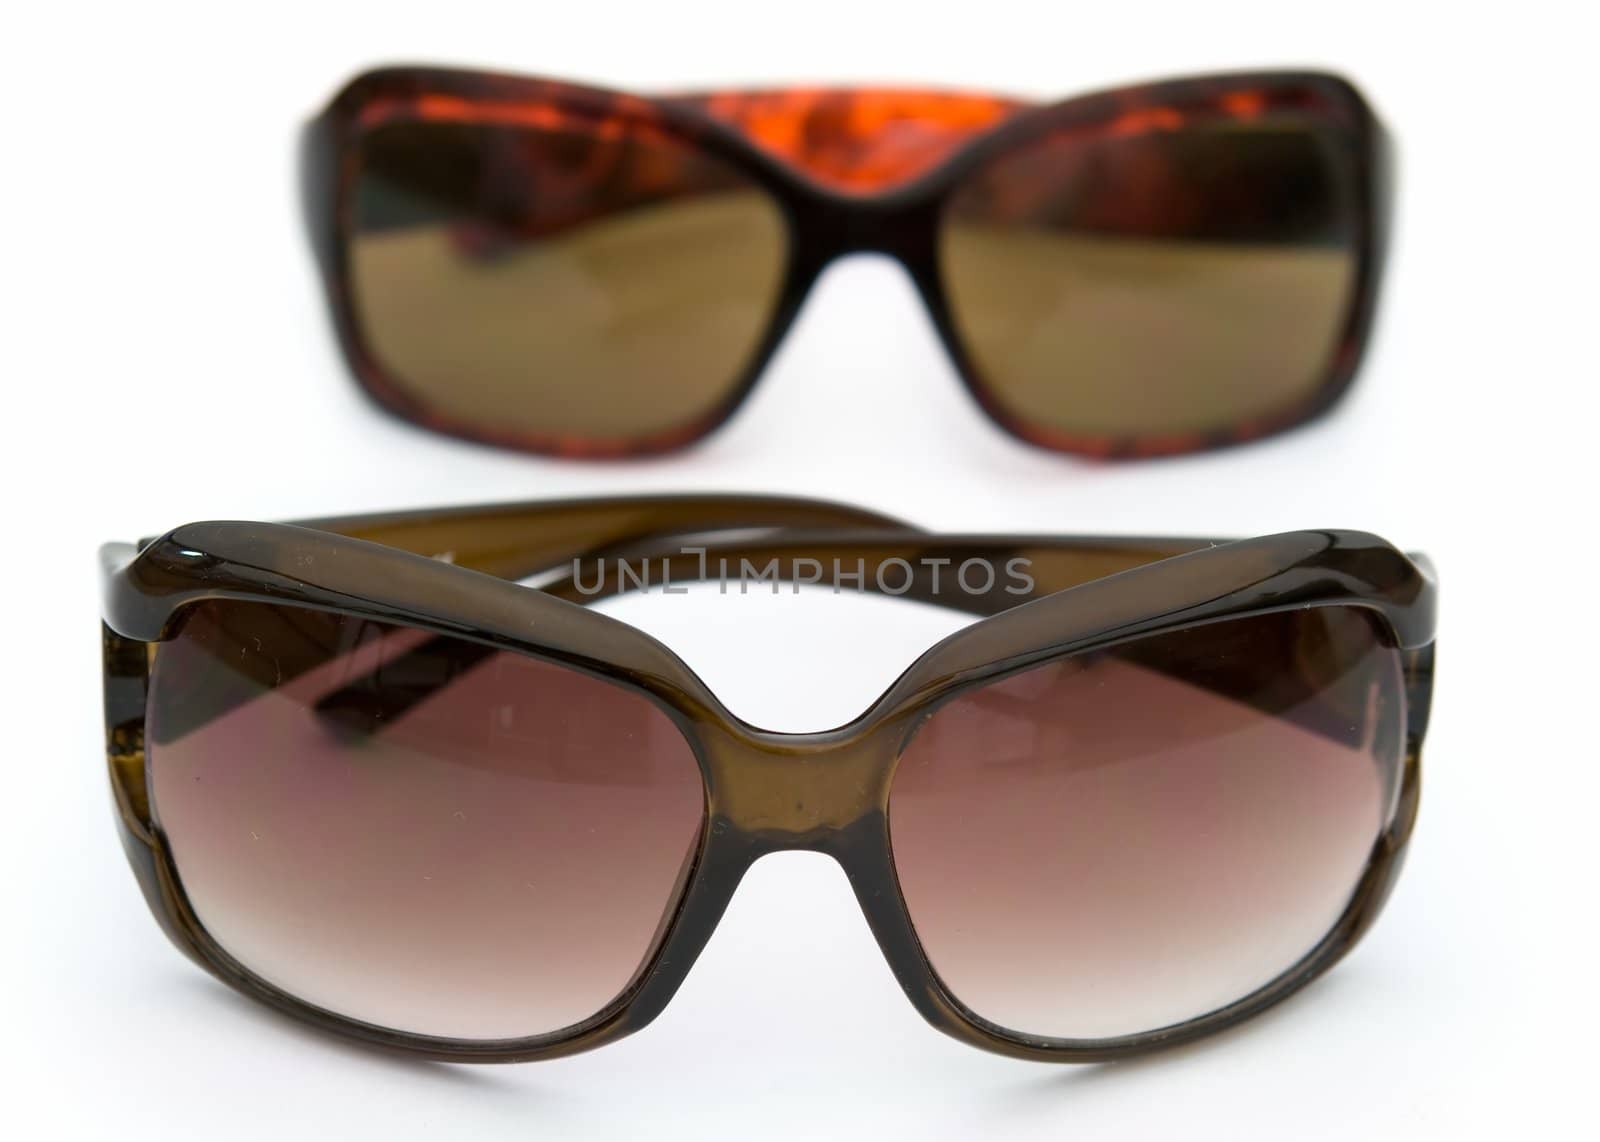 Sunshade. Sun glasses on a white background